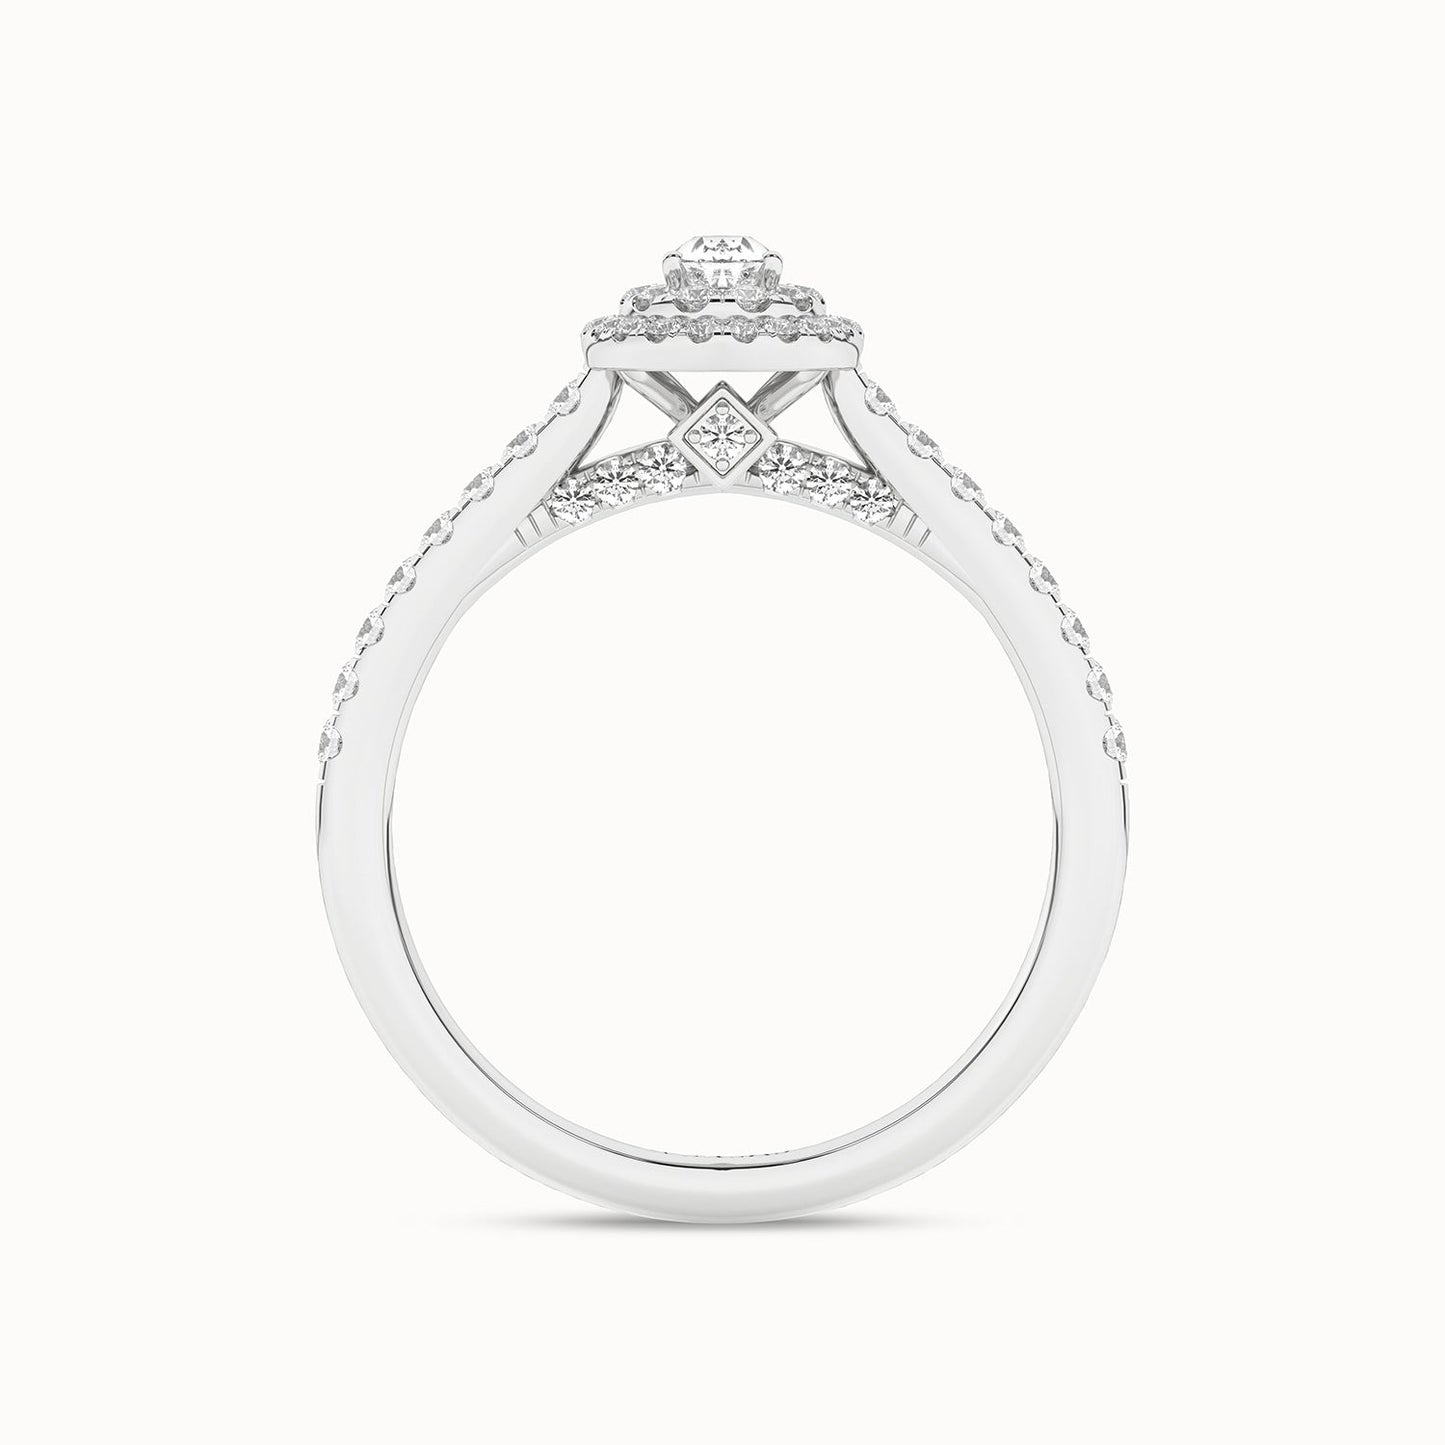 Signature Dewdrop Double halo Ring_Product Angle_1/2-3